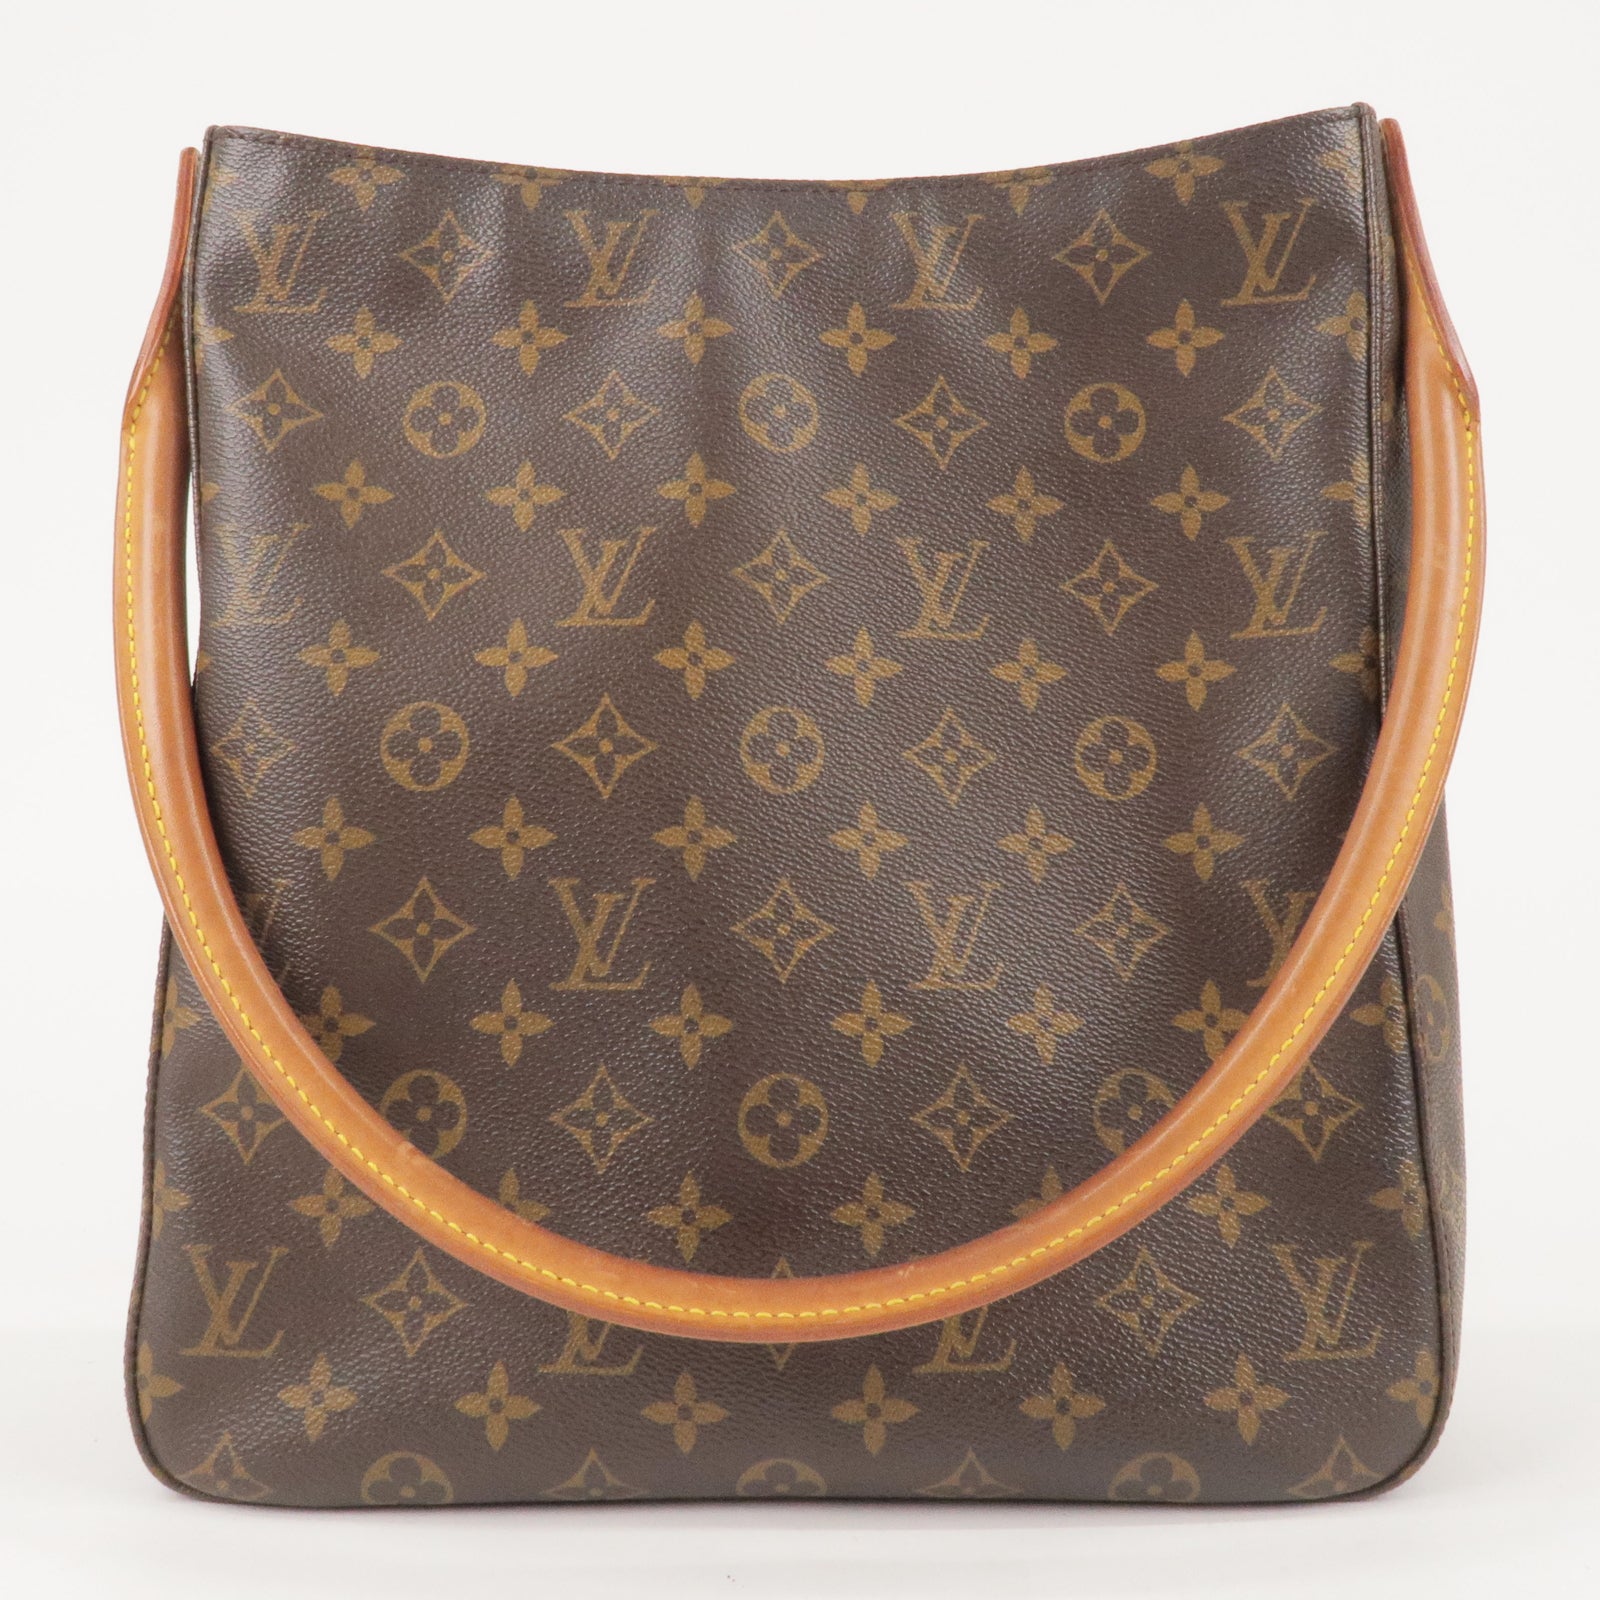 Louis Vuitton 2004 pre-owned Looping GM Tote Bag - Farfetch